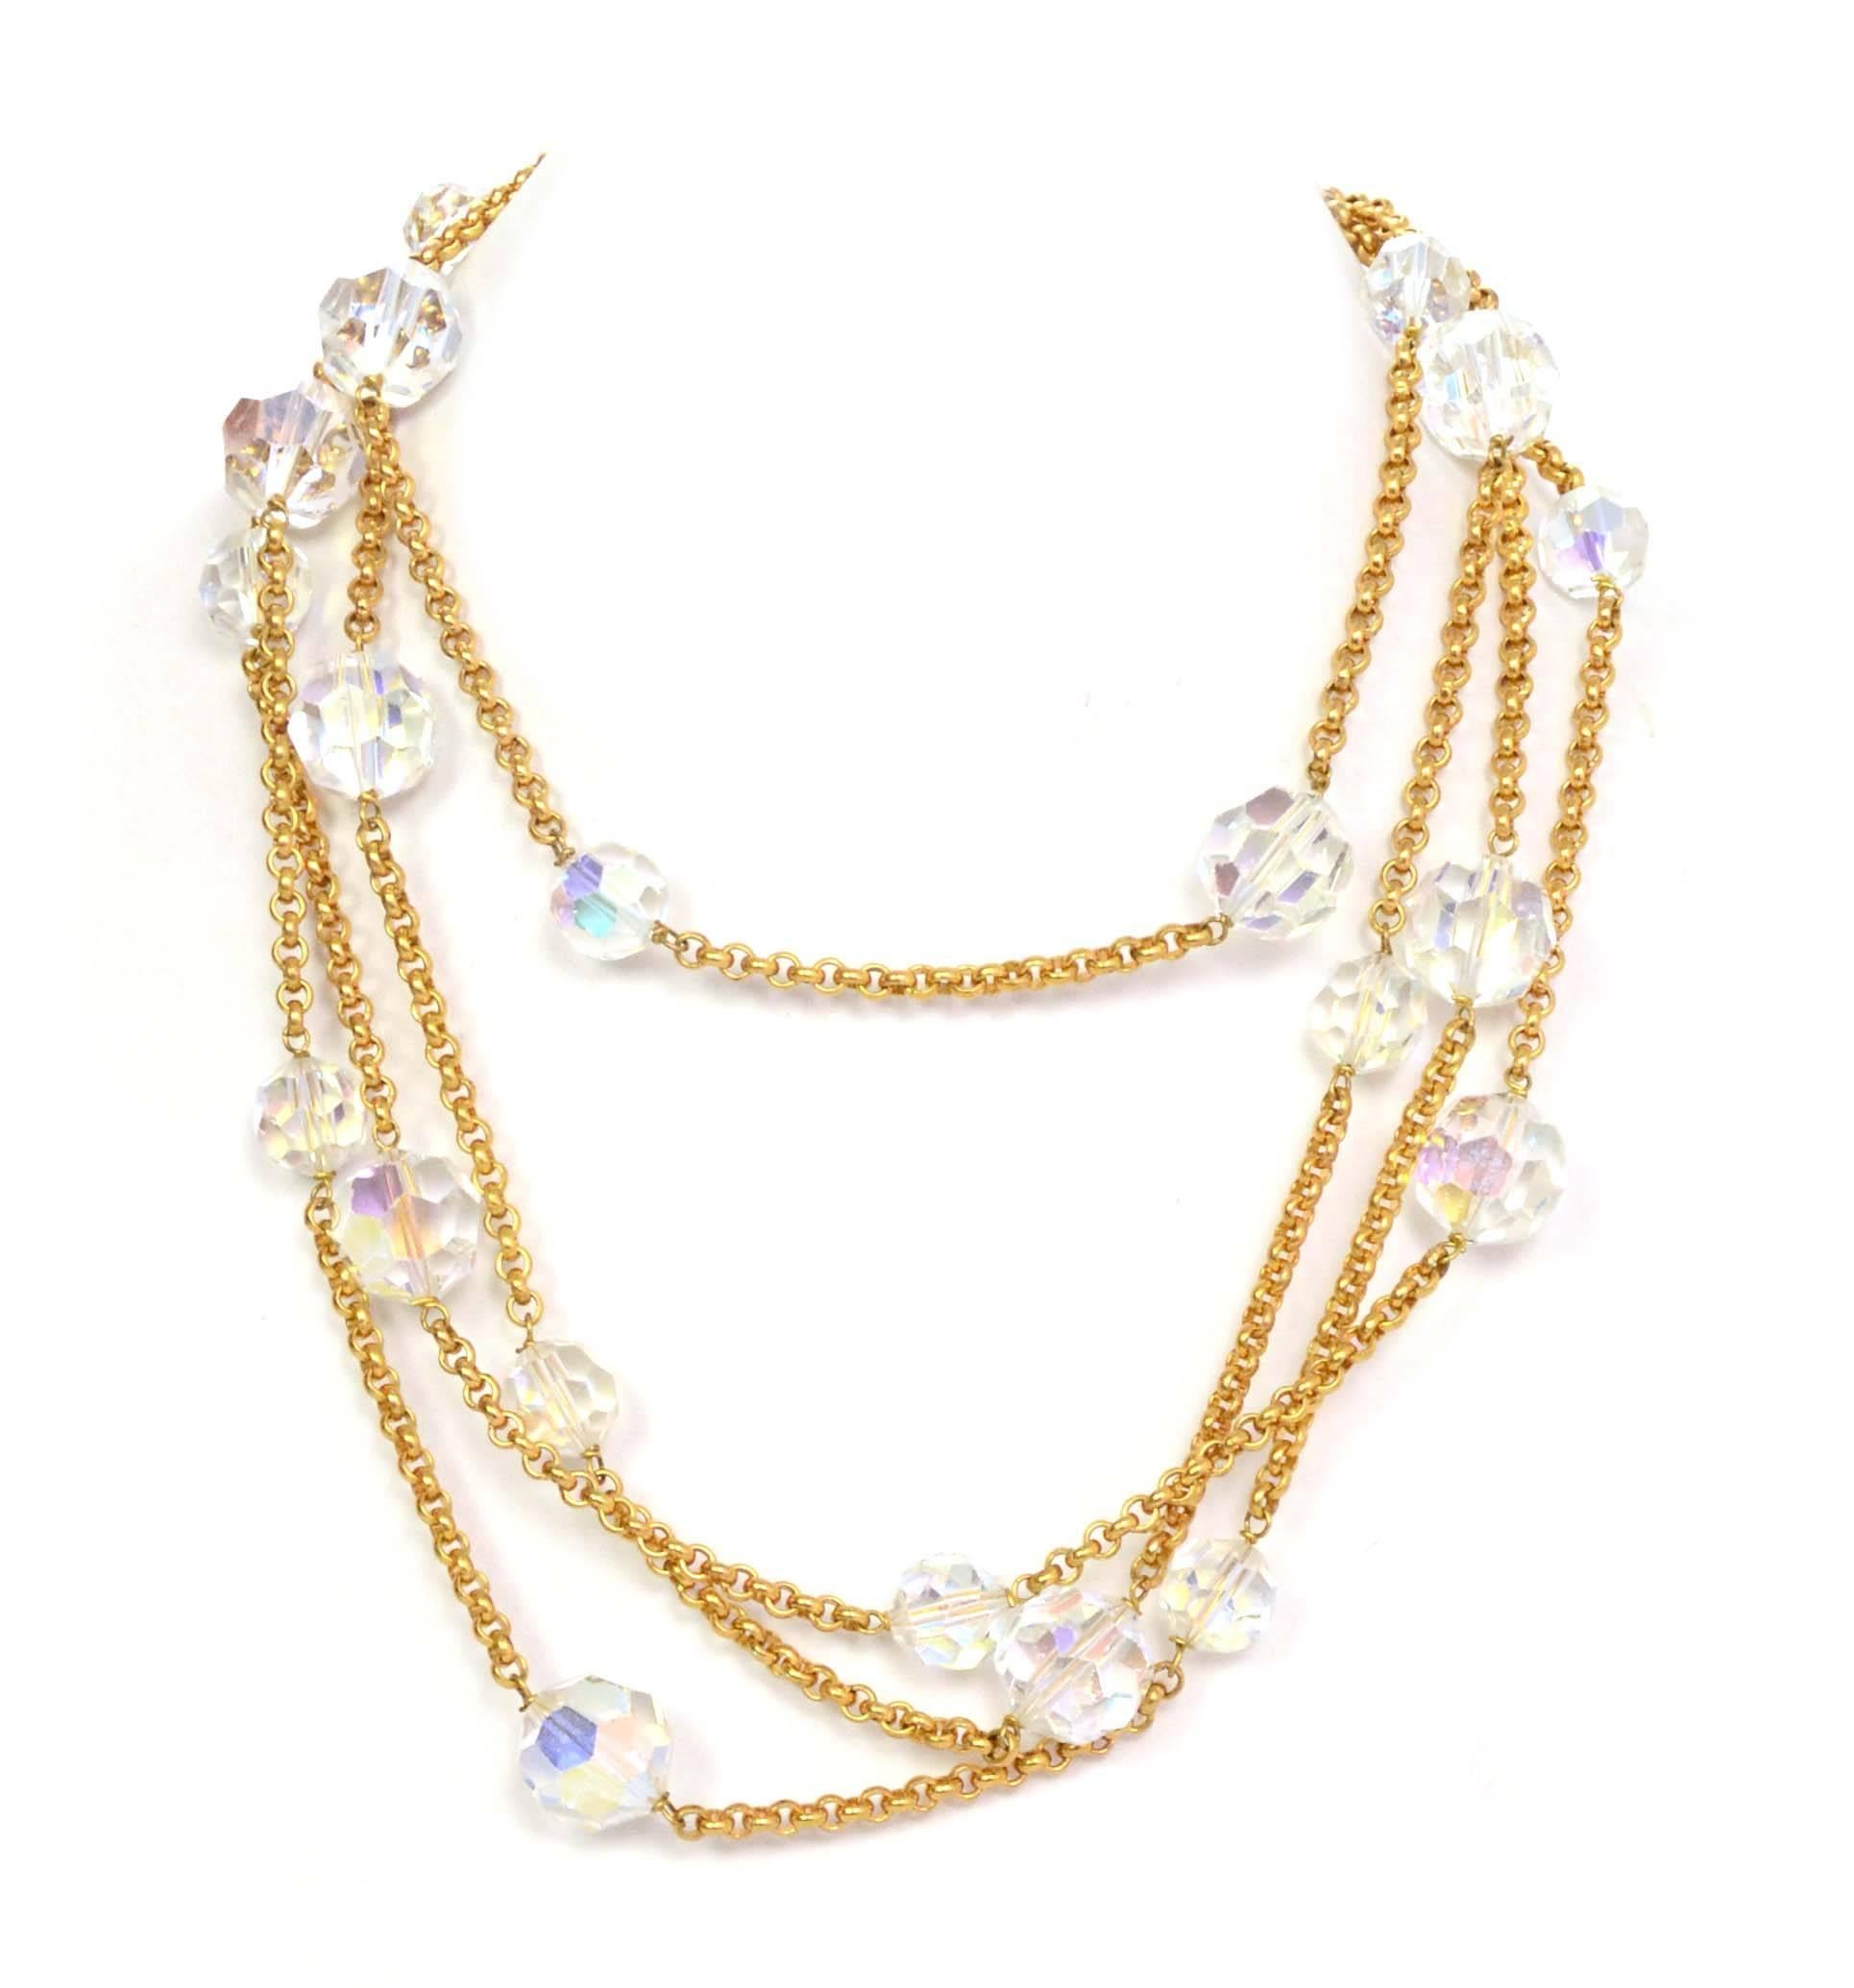 Chanel Vintage '88 Gold Chain Link Crystal Beaded Long Necklace 
Features graduated crystal beads

Made In: France
Year of Production: 1988
Color: Goldtone and clear iridescent
Materials: Crystal beads and metal
Closure: Lobster claw